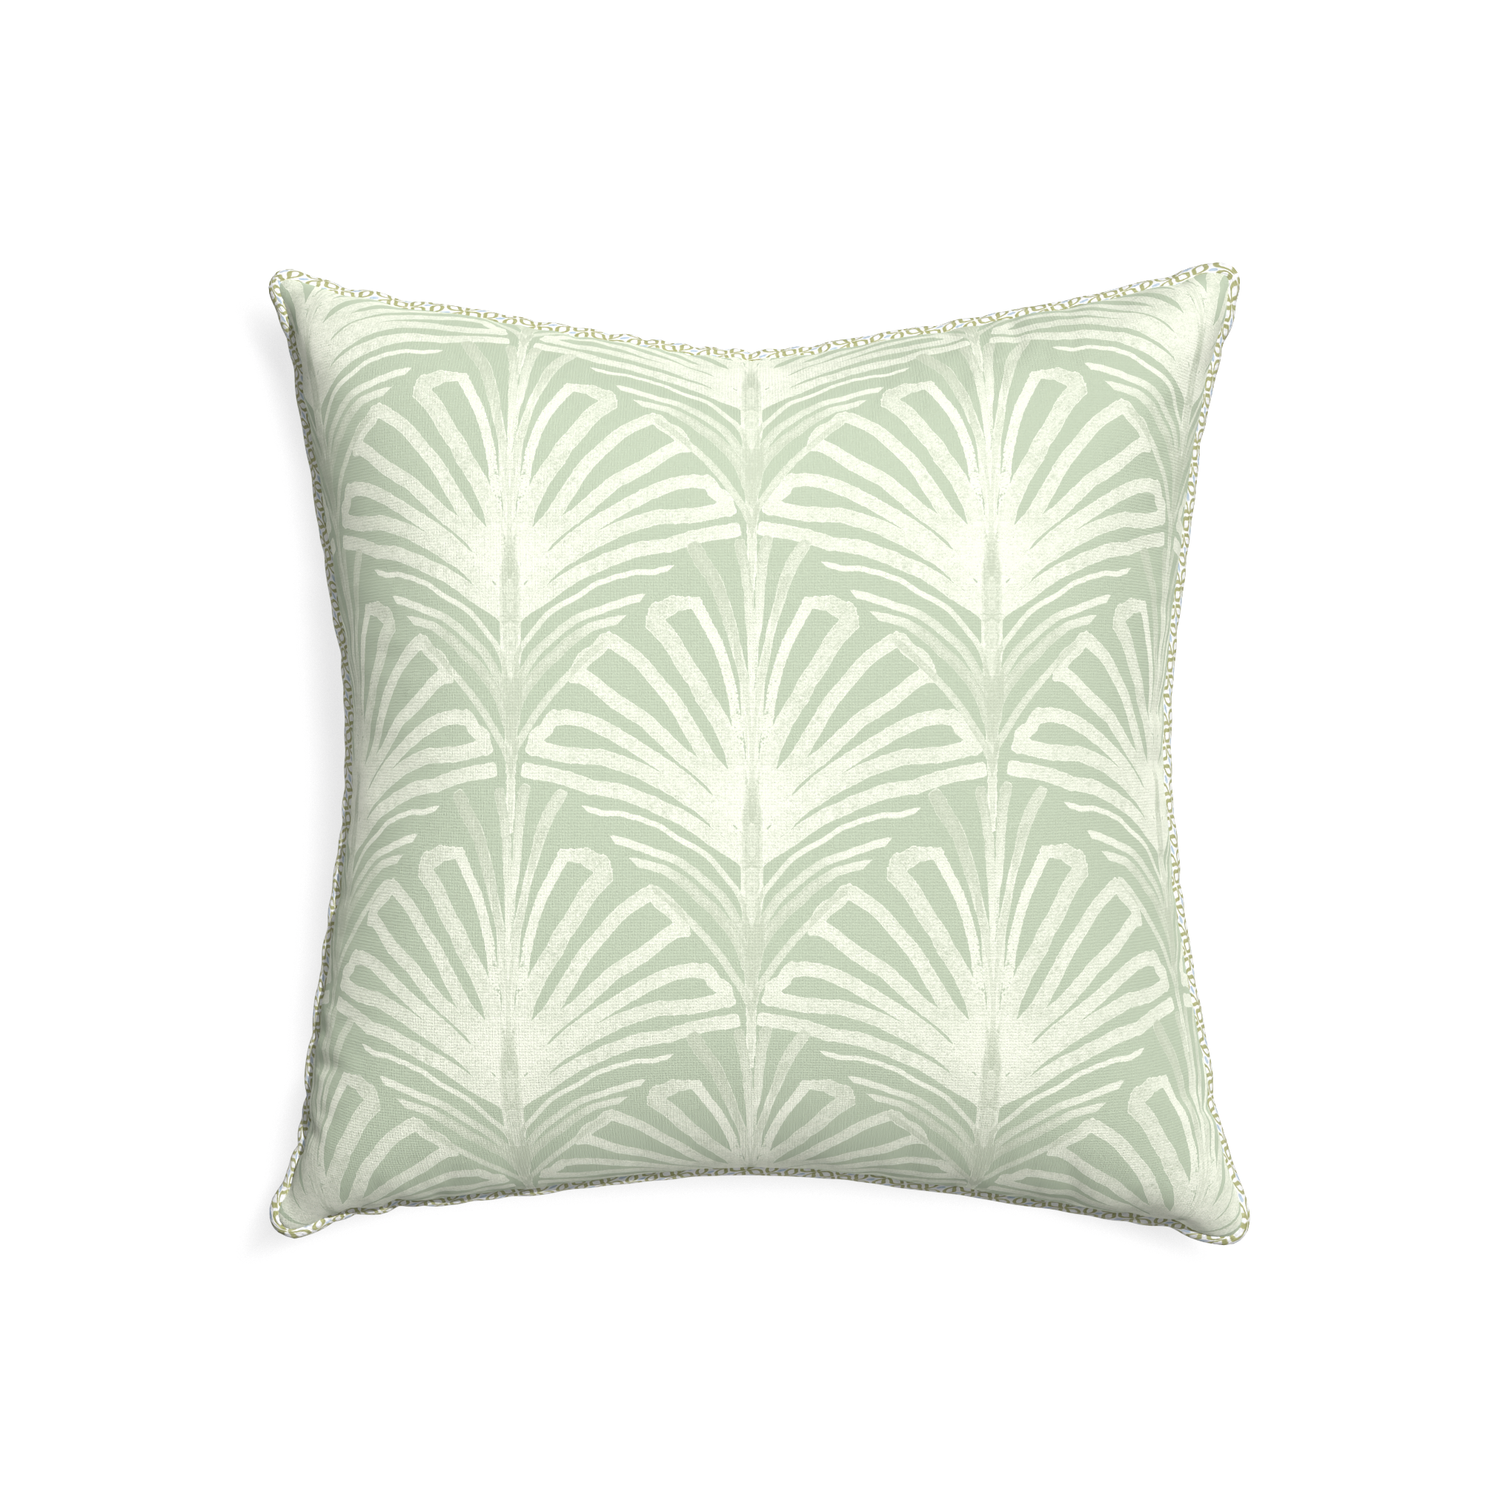 22-square suzy sage custom pillow with l piping on white background